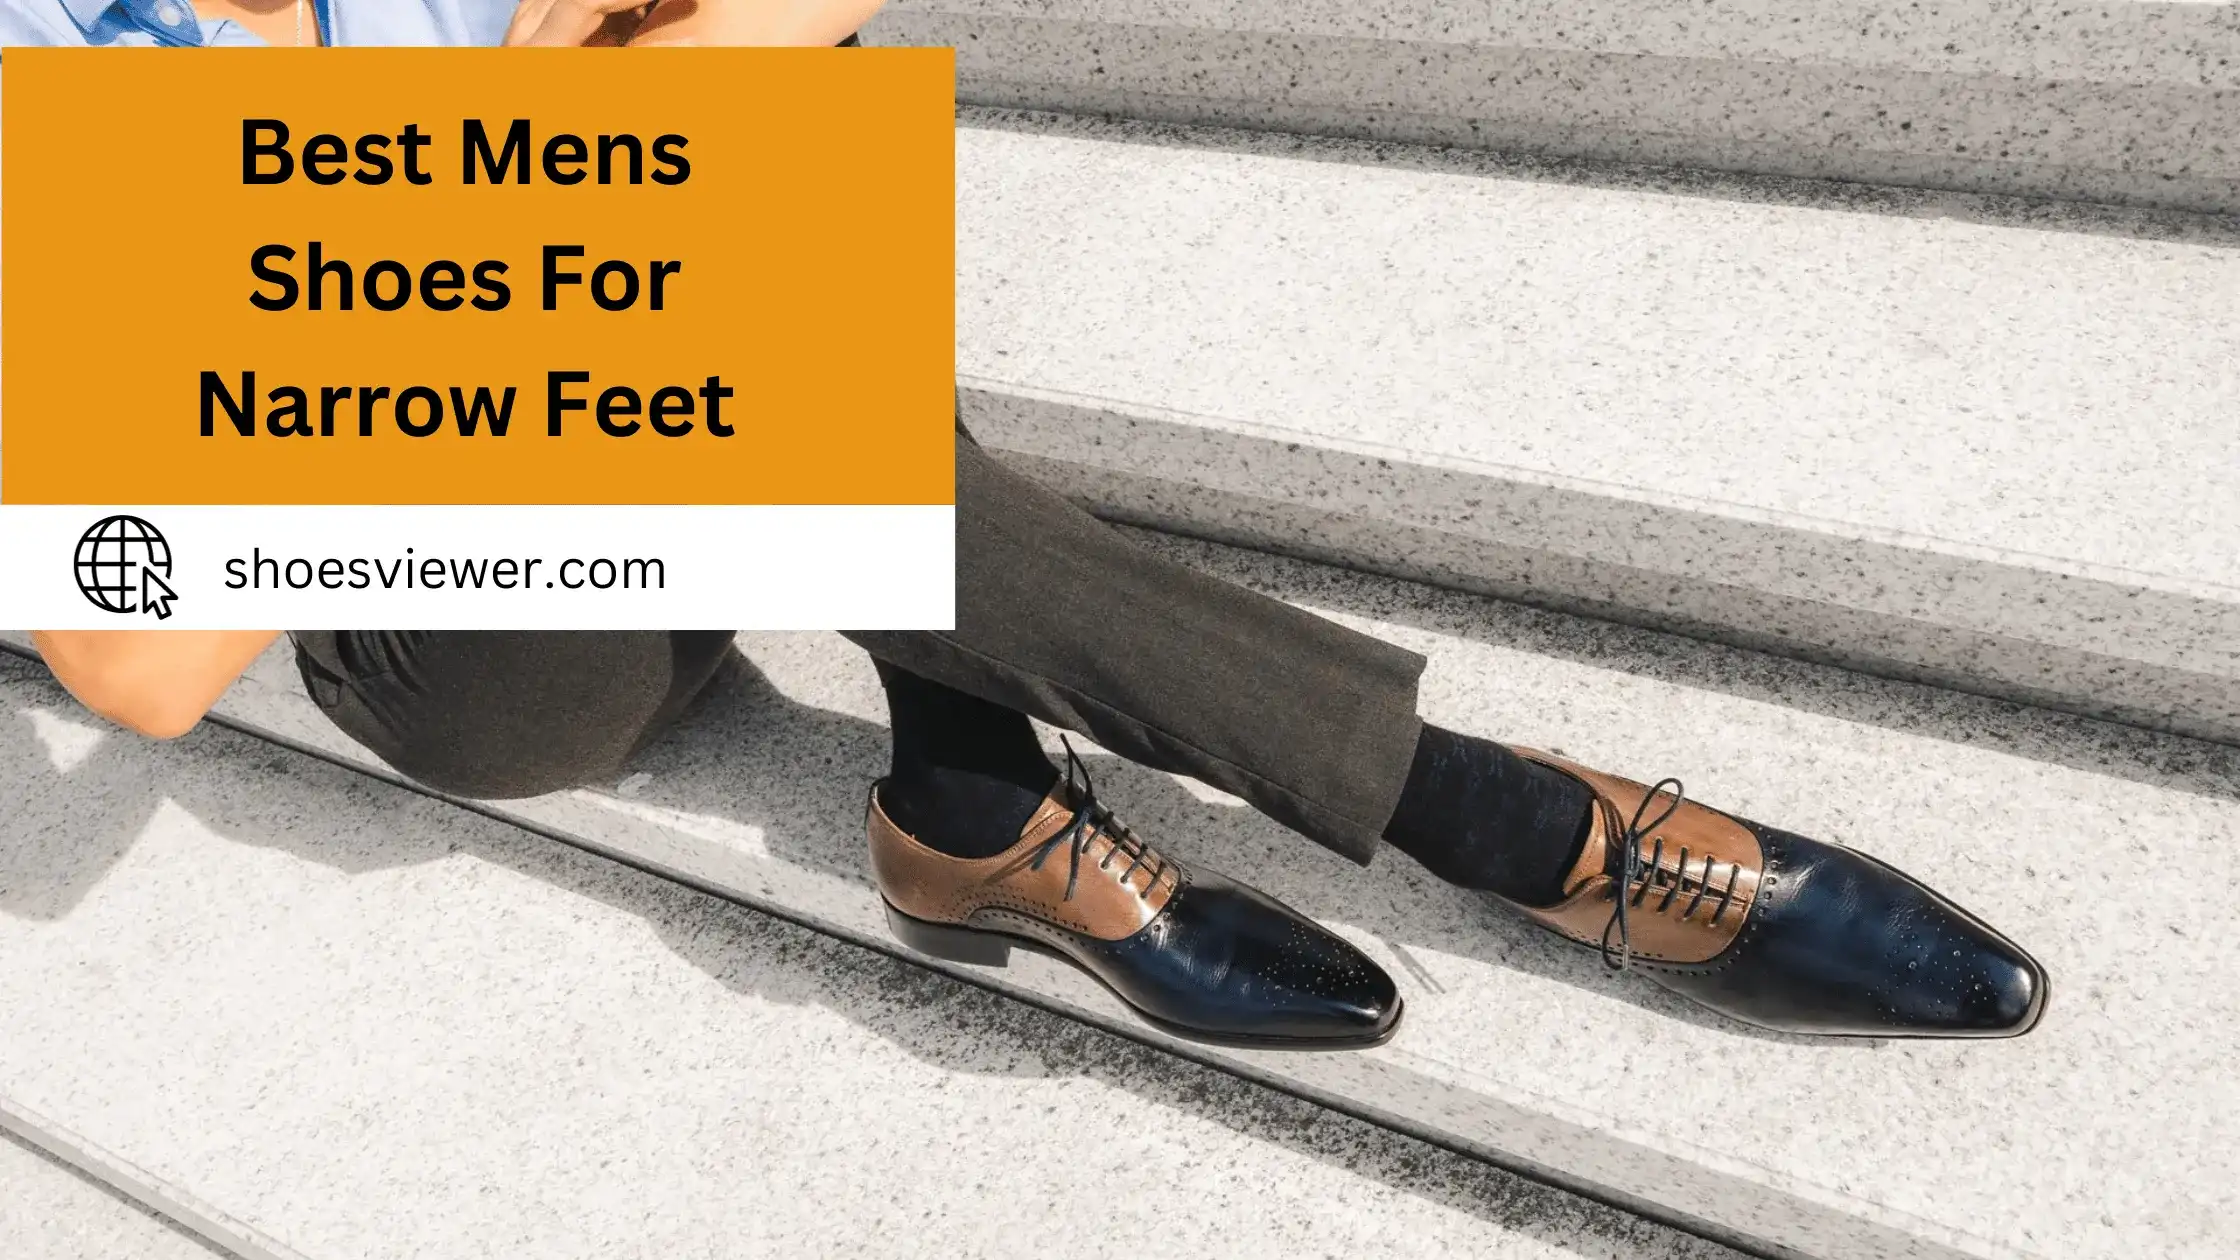 Top Rated 10 Best Mens Shoes For Narrow Feet